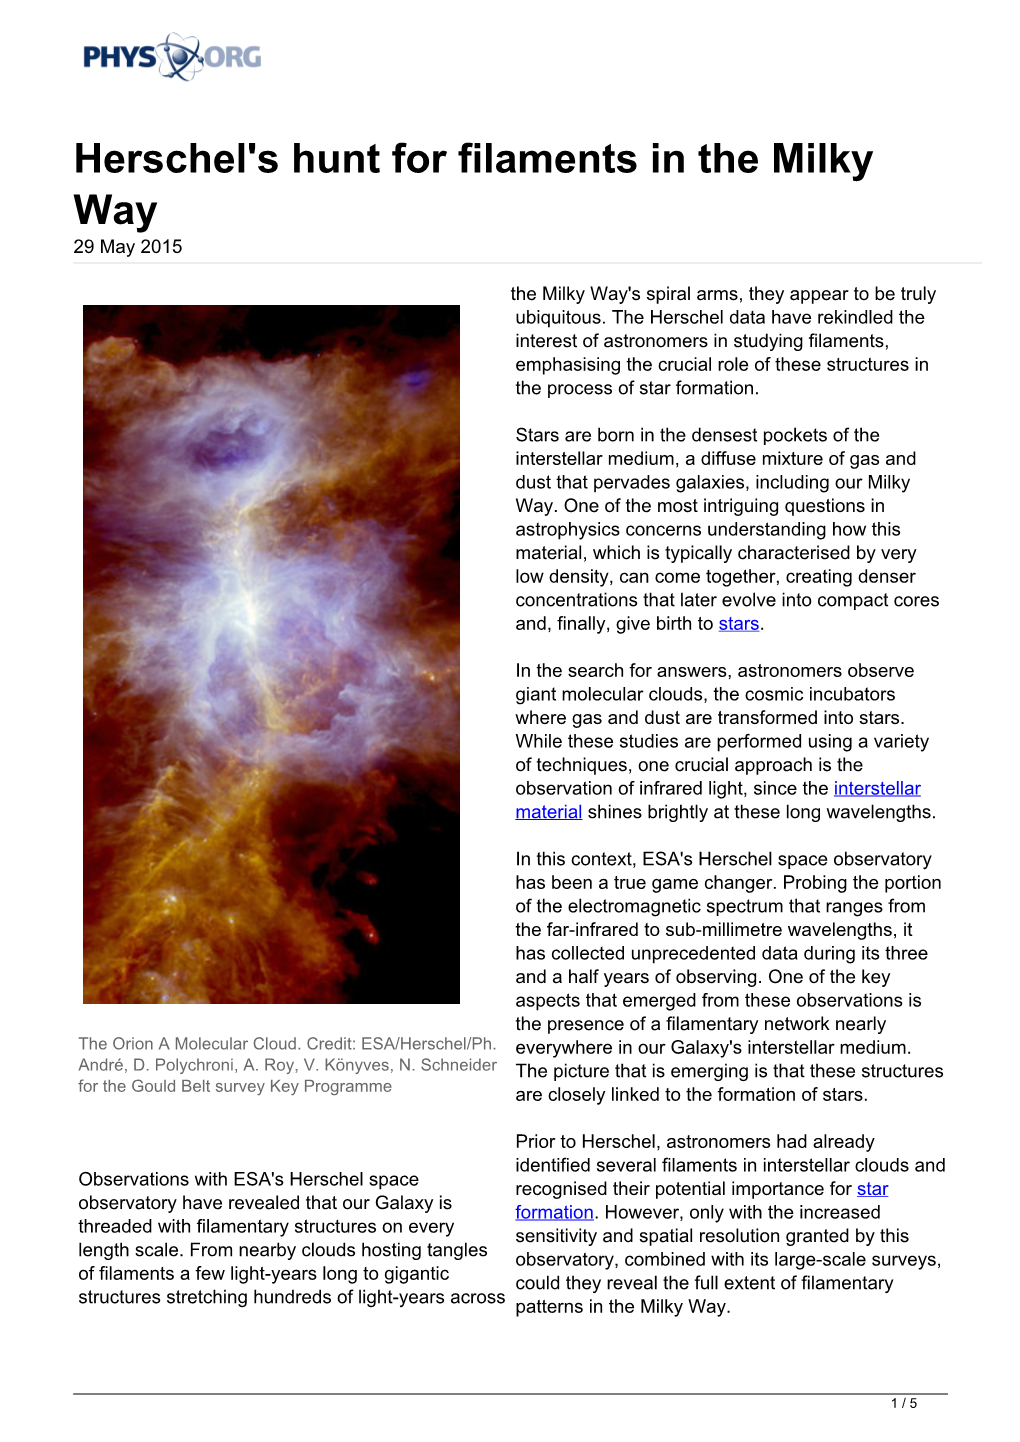 Herschel's Hunt for Filaments in the Milky Way 29 May 2015